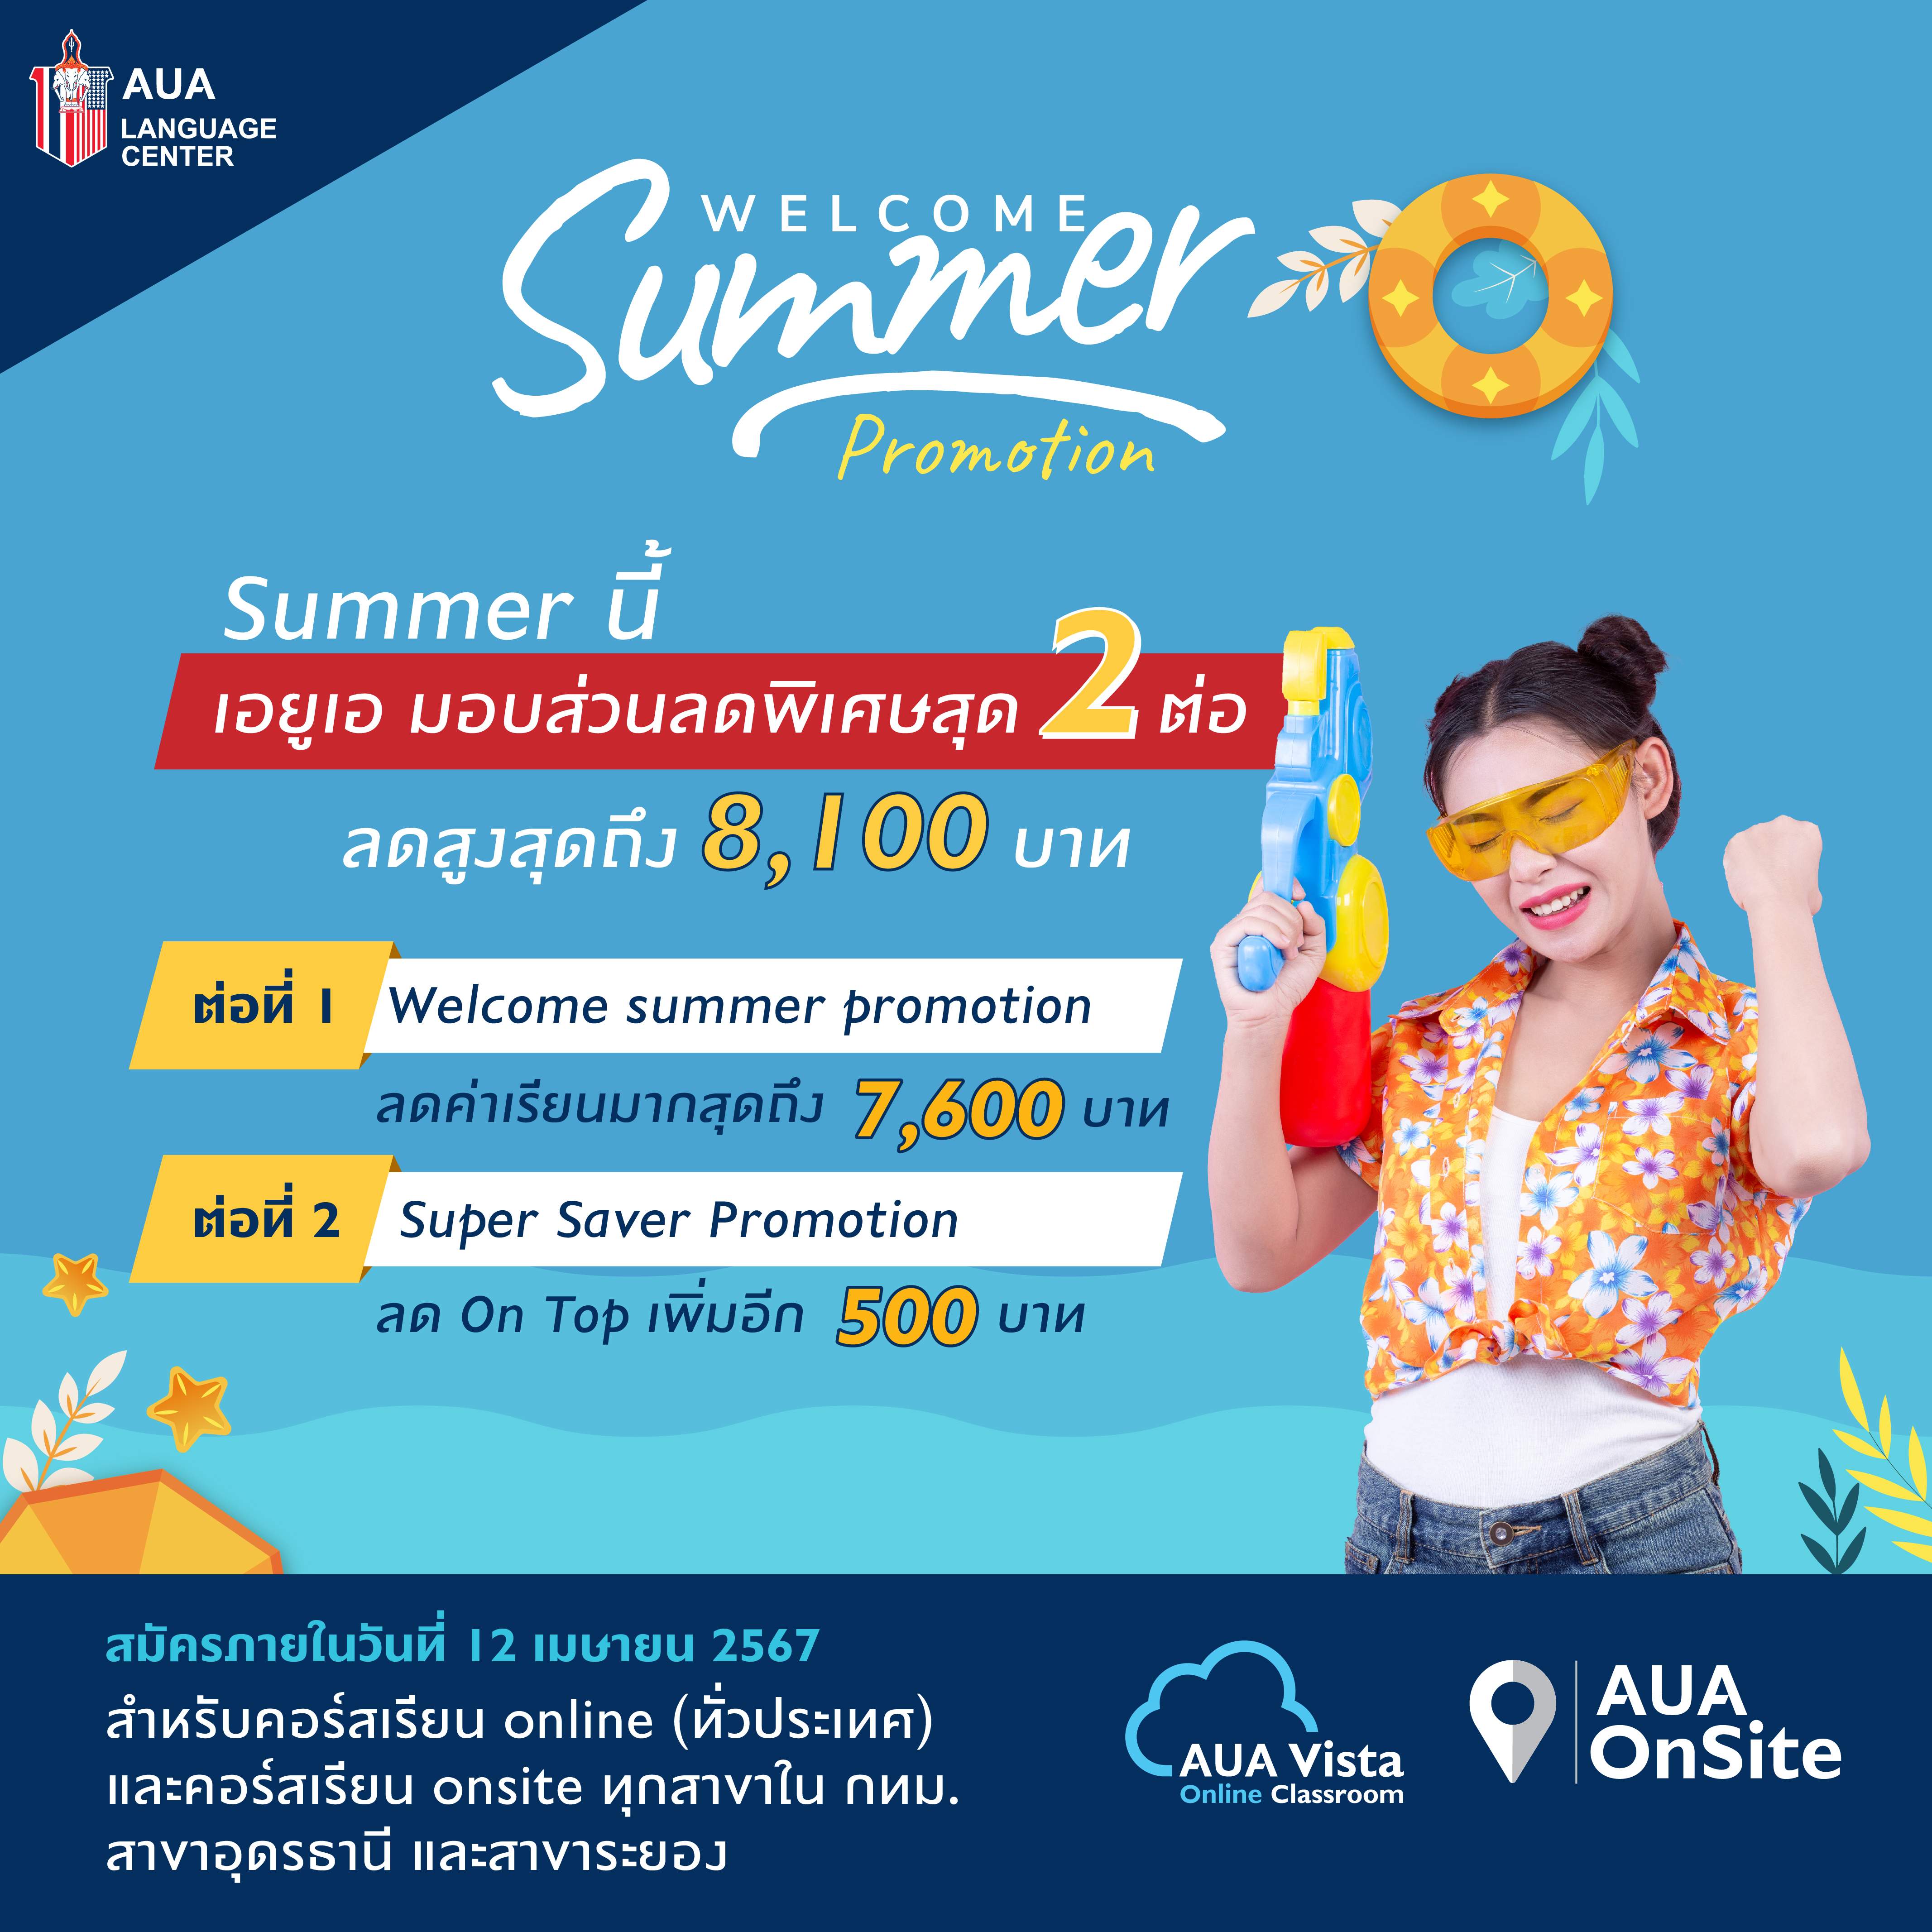 Welcome Summer promotion